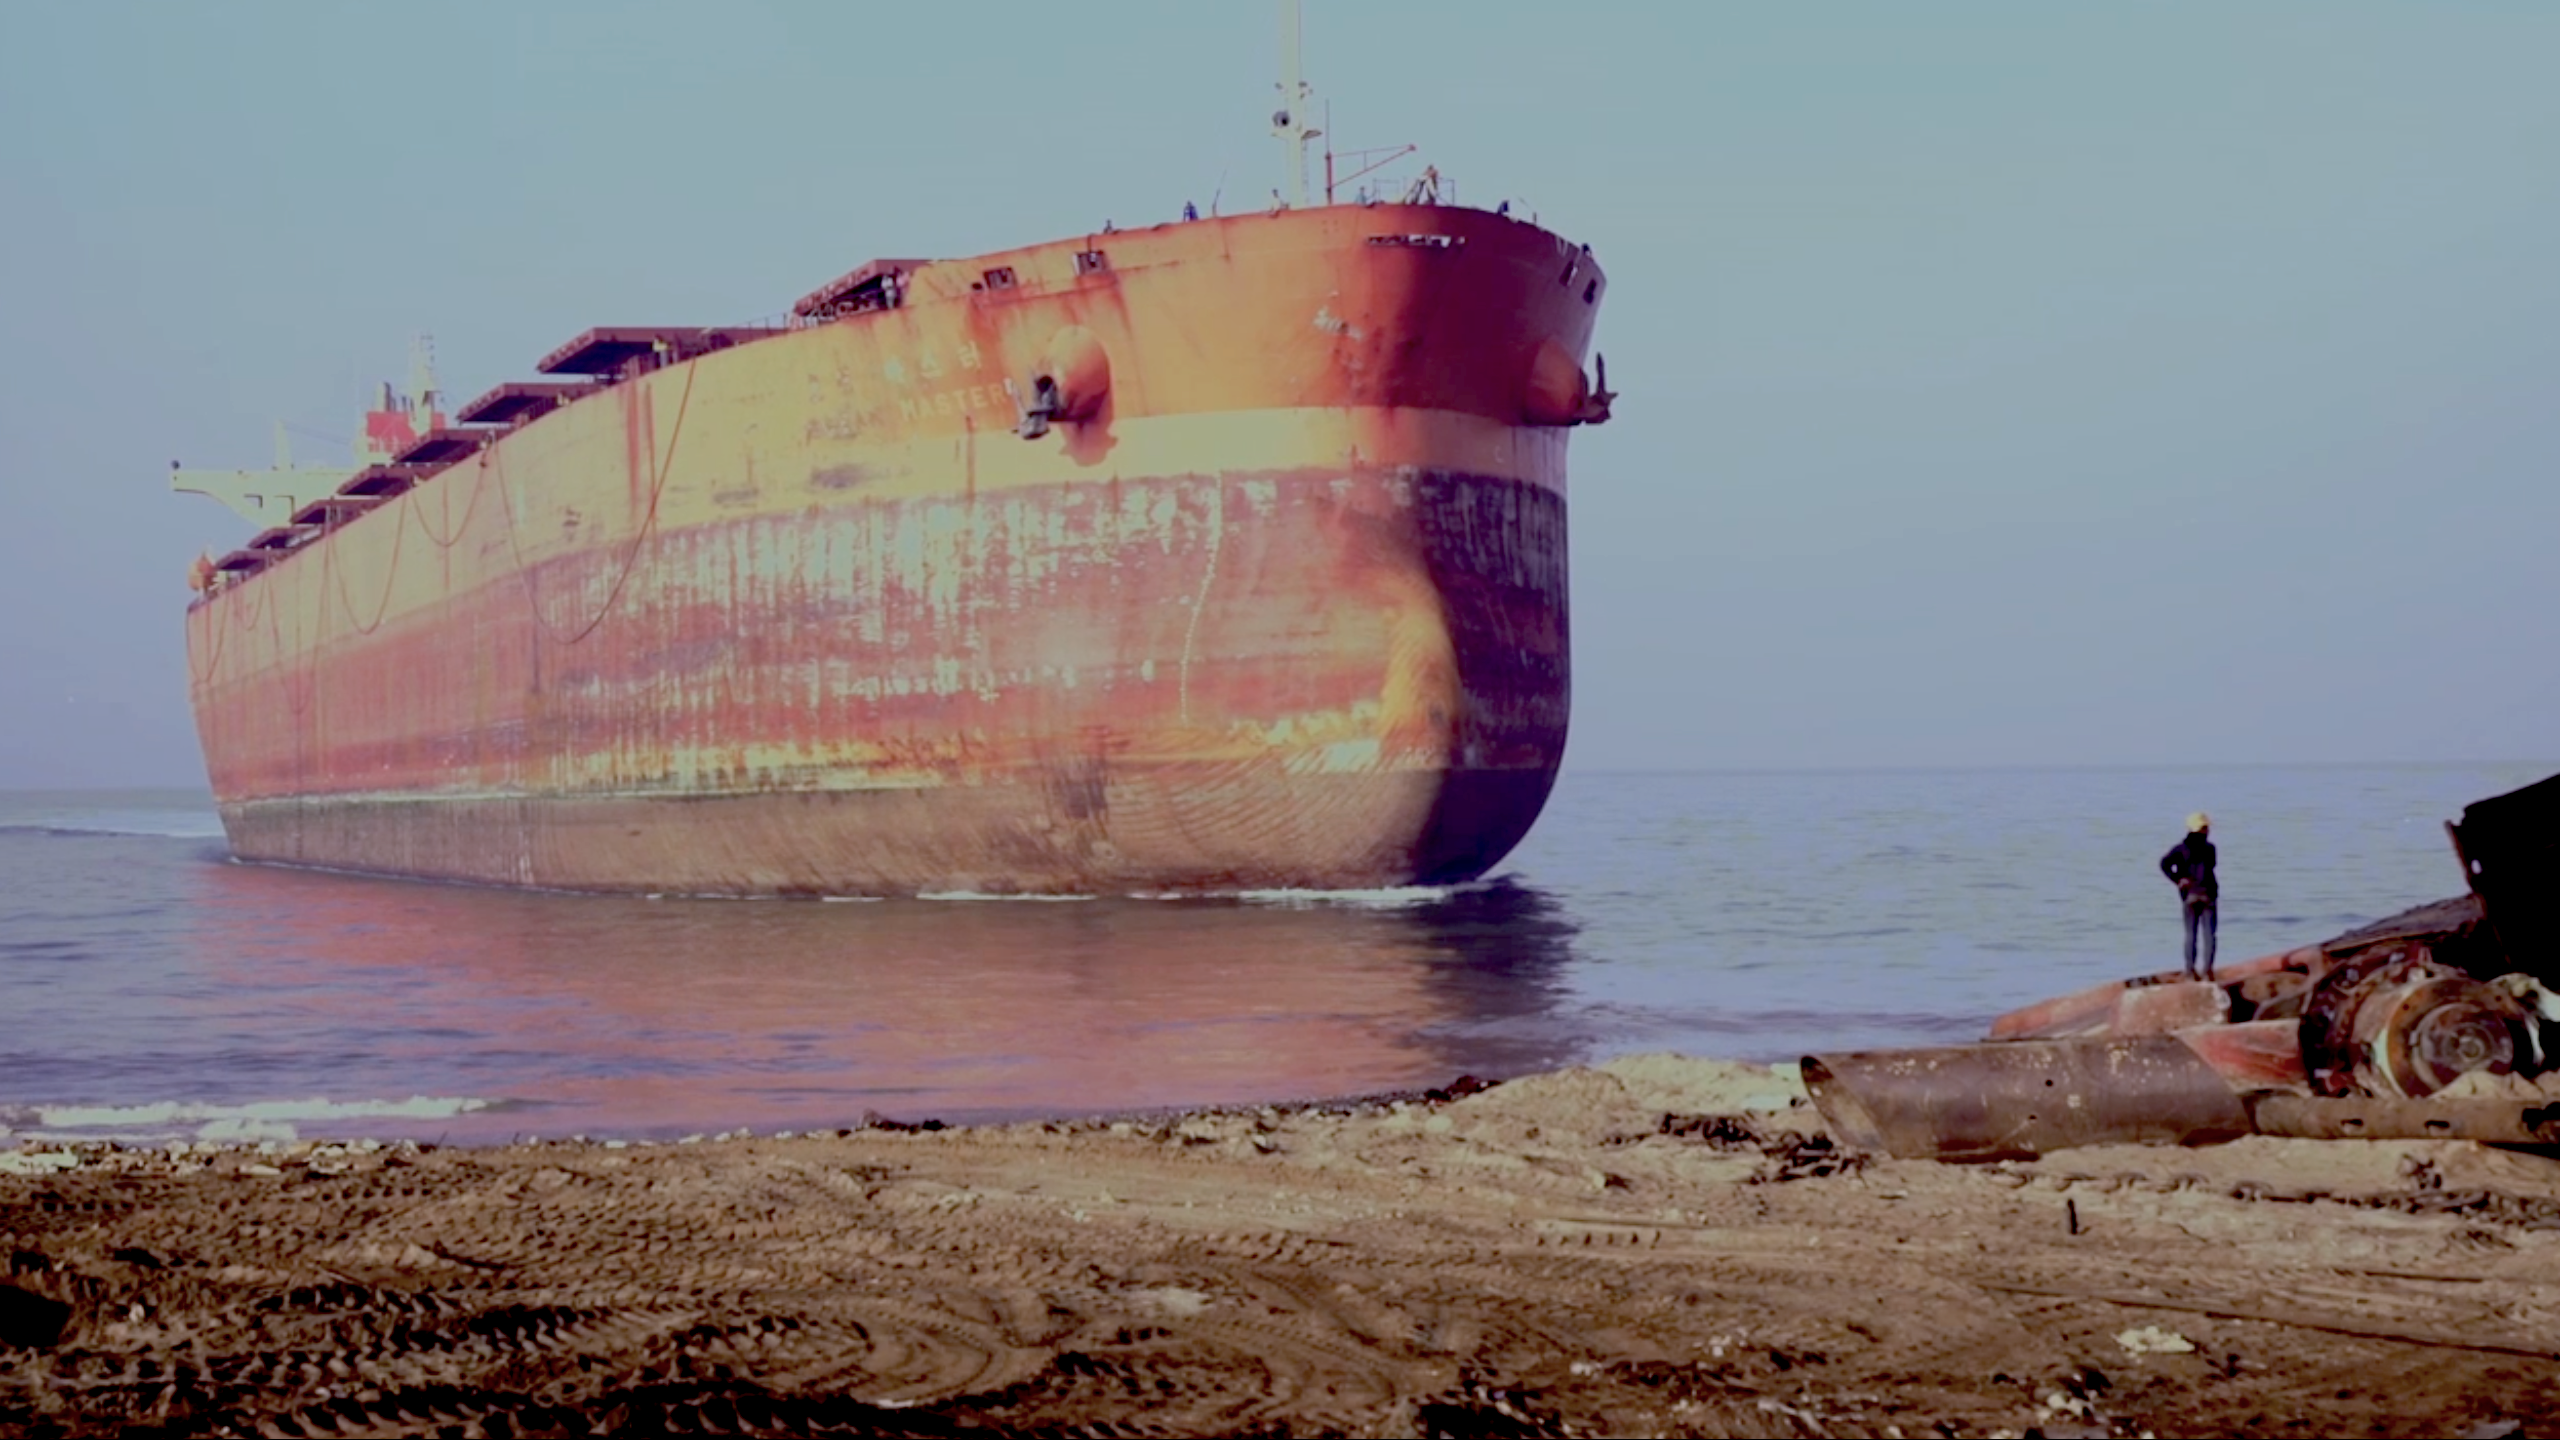 Image of a rusted ship beached.